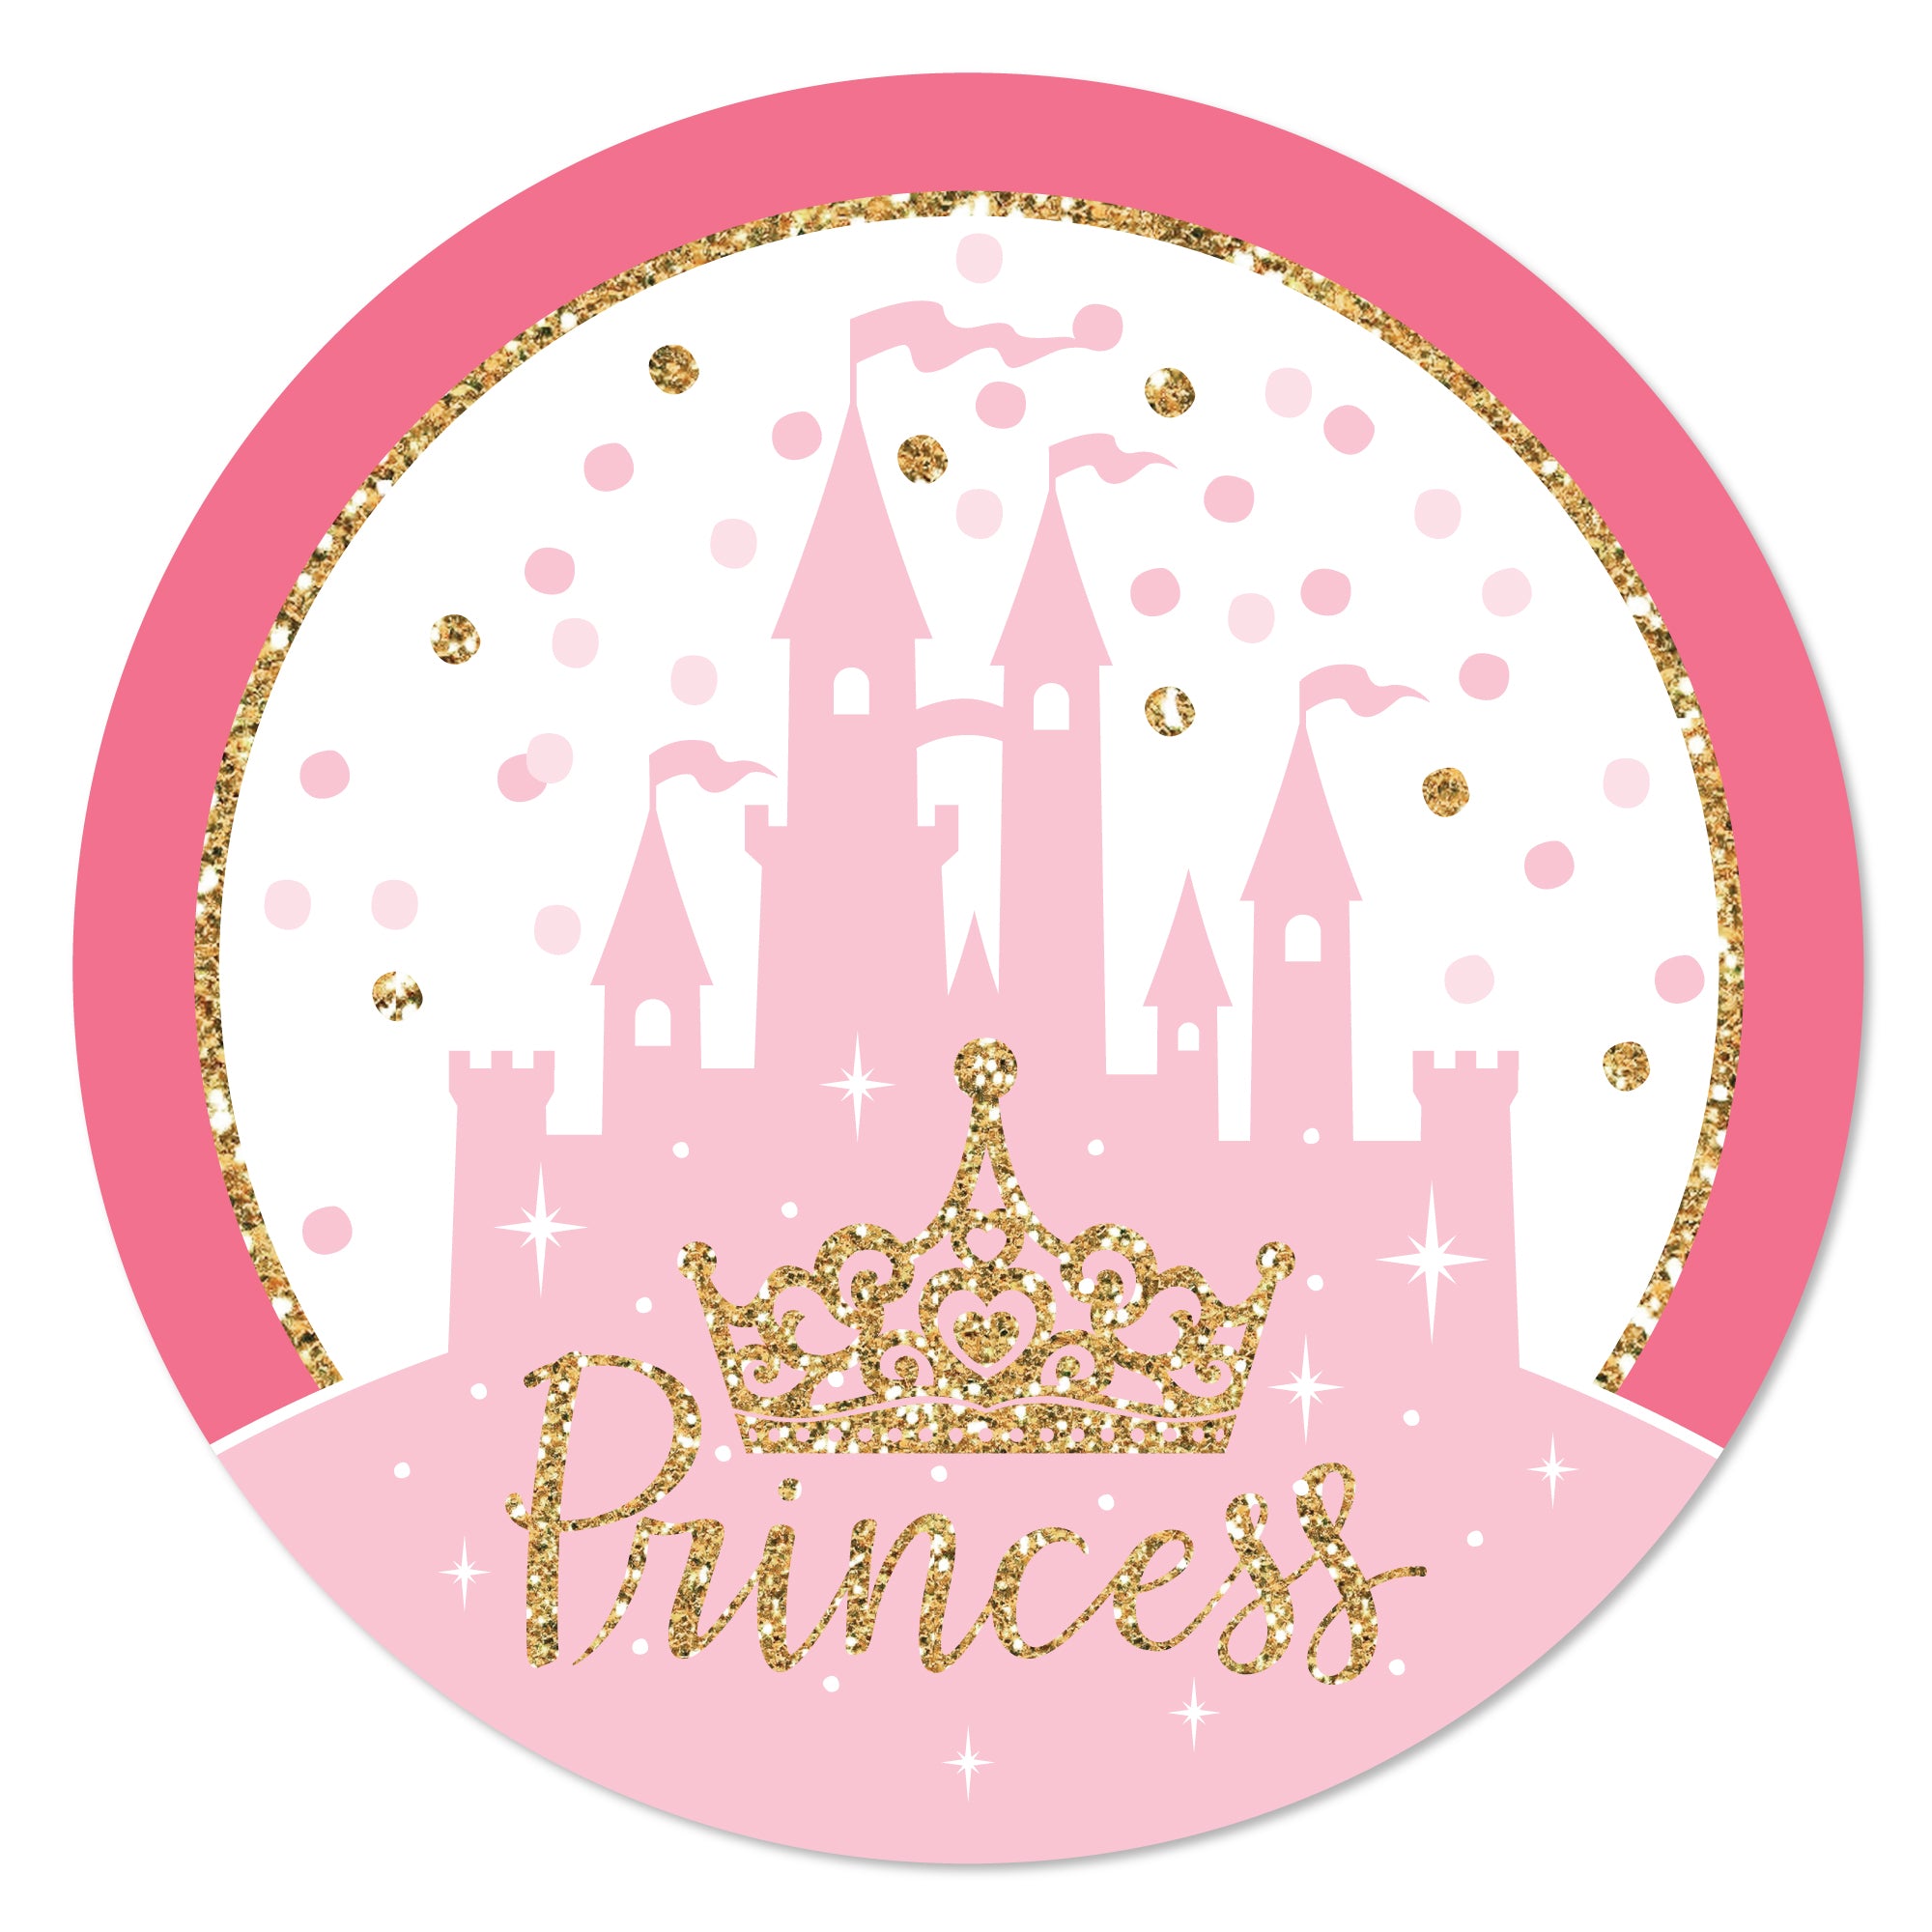 Big Dot of Happiness Little Princess Crown Pink & Gold Princess Baby Shower or Birthday Party Clear Goodie Favor Labels Candy Bags with Toppers 24 ct